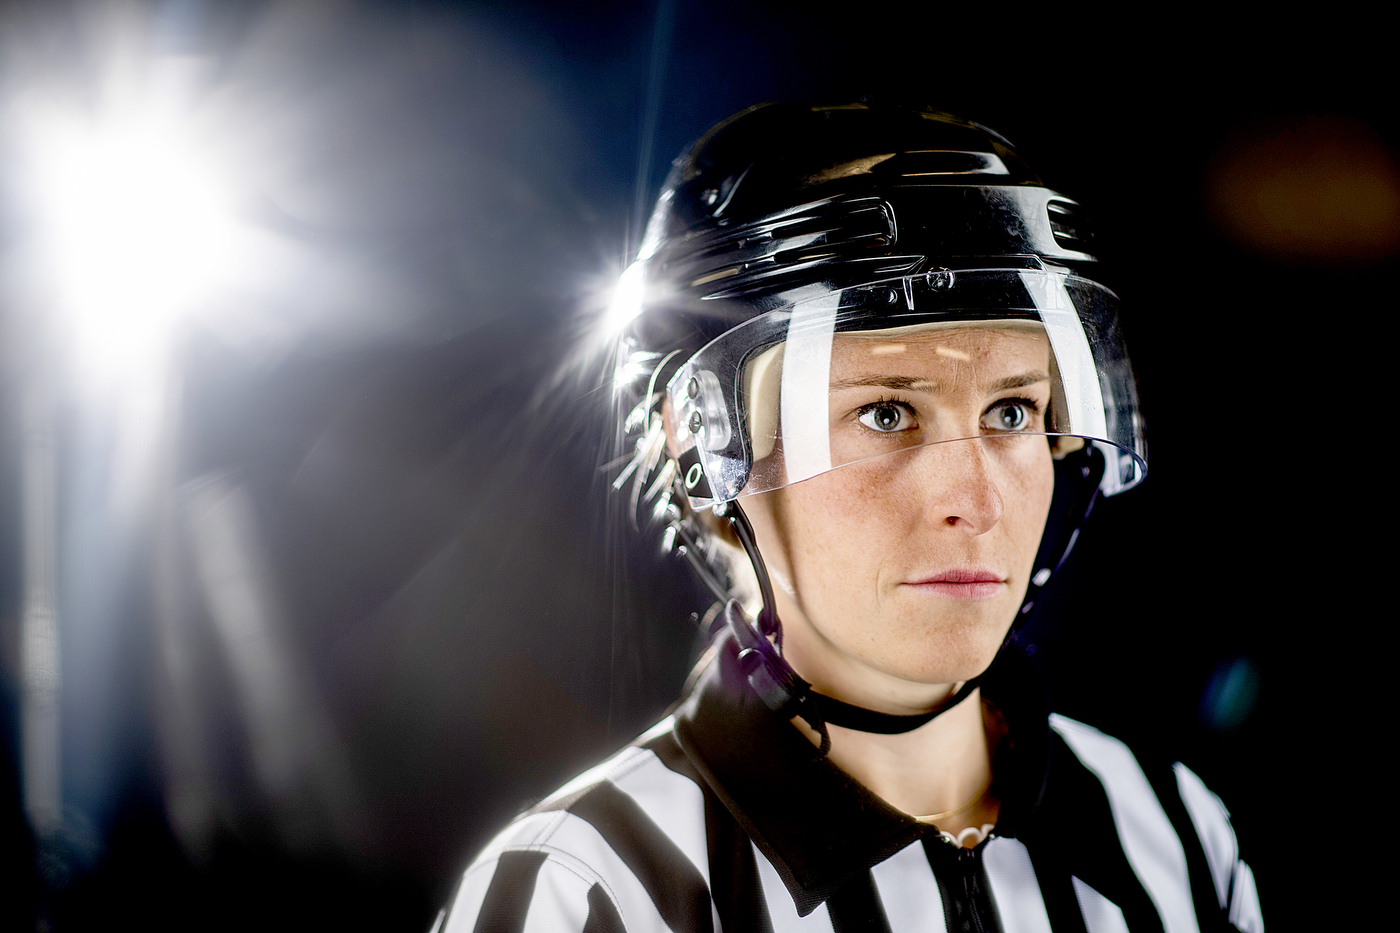 Making history from the ice: Kelly Cooke on becoming one of the first women to referee in National Hockey League prospect tournaments